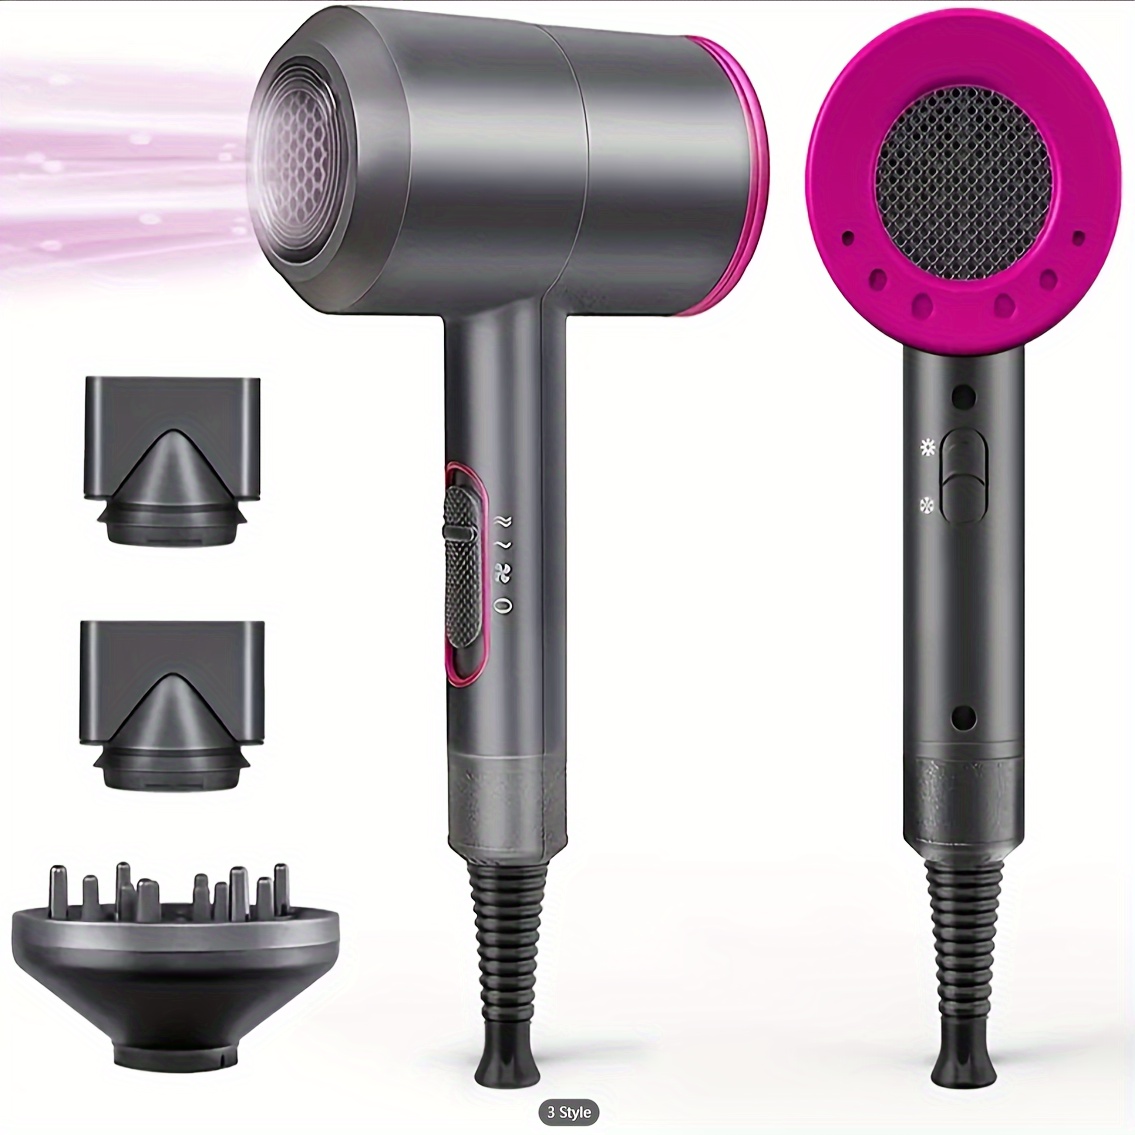 

Professional Hair Dryer With Diffuser Ionic Conditioning - Powerful, Fast Hairdryer Blow Dryer, Ac Motor Heat Hot And Cold Wind Constant Temperature Hair Care Without Damaging Hair